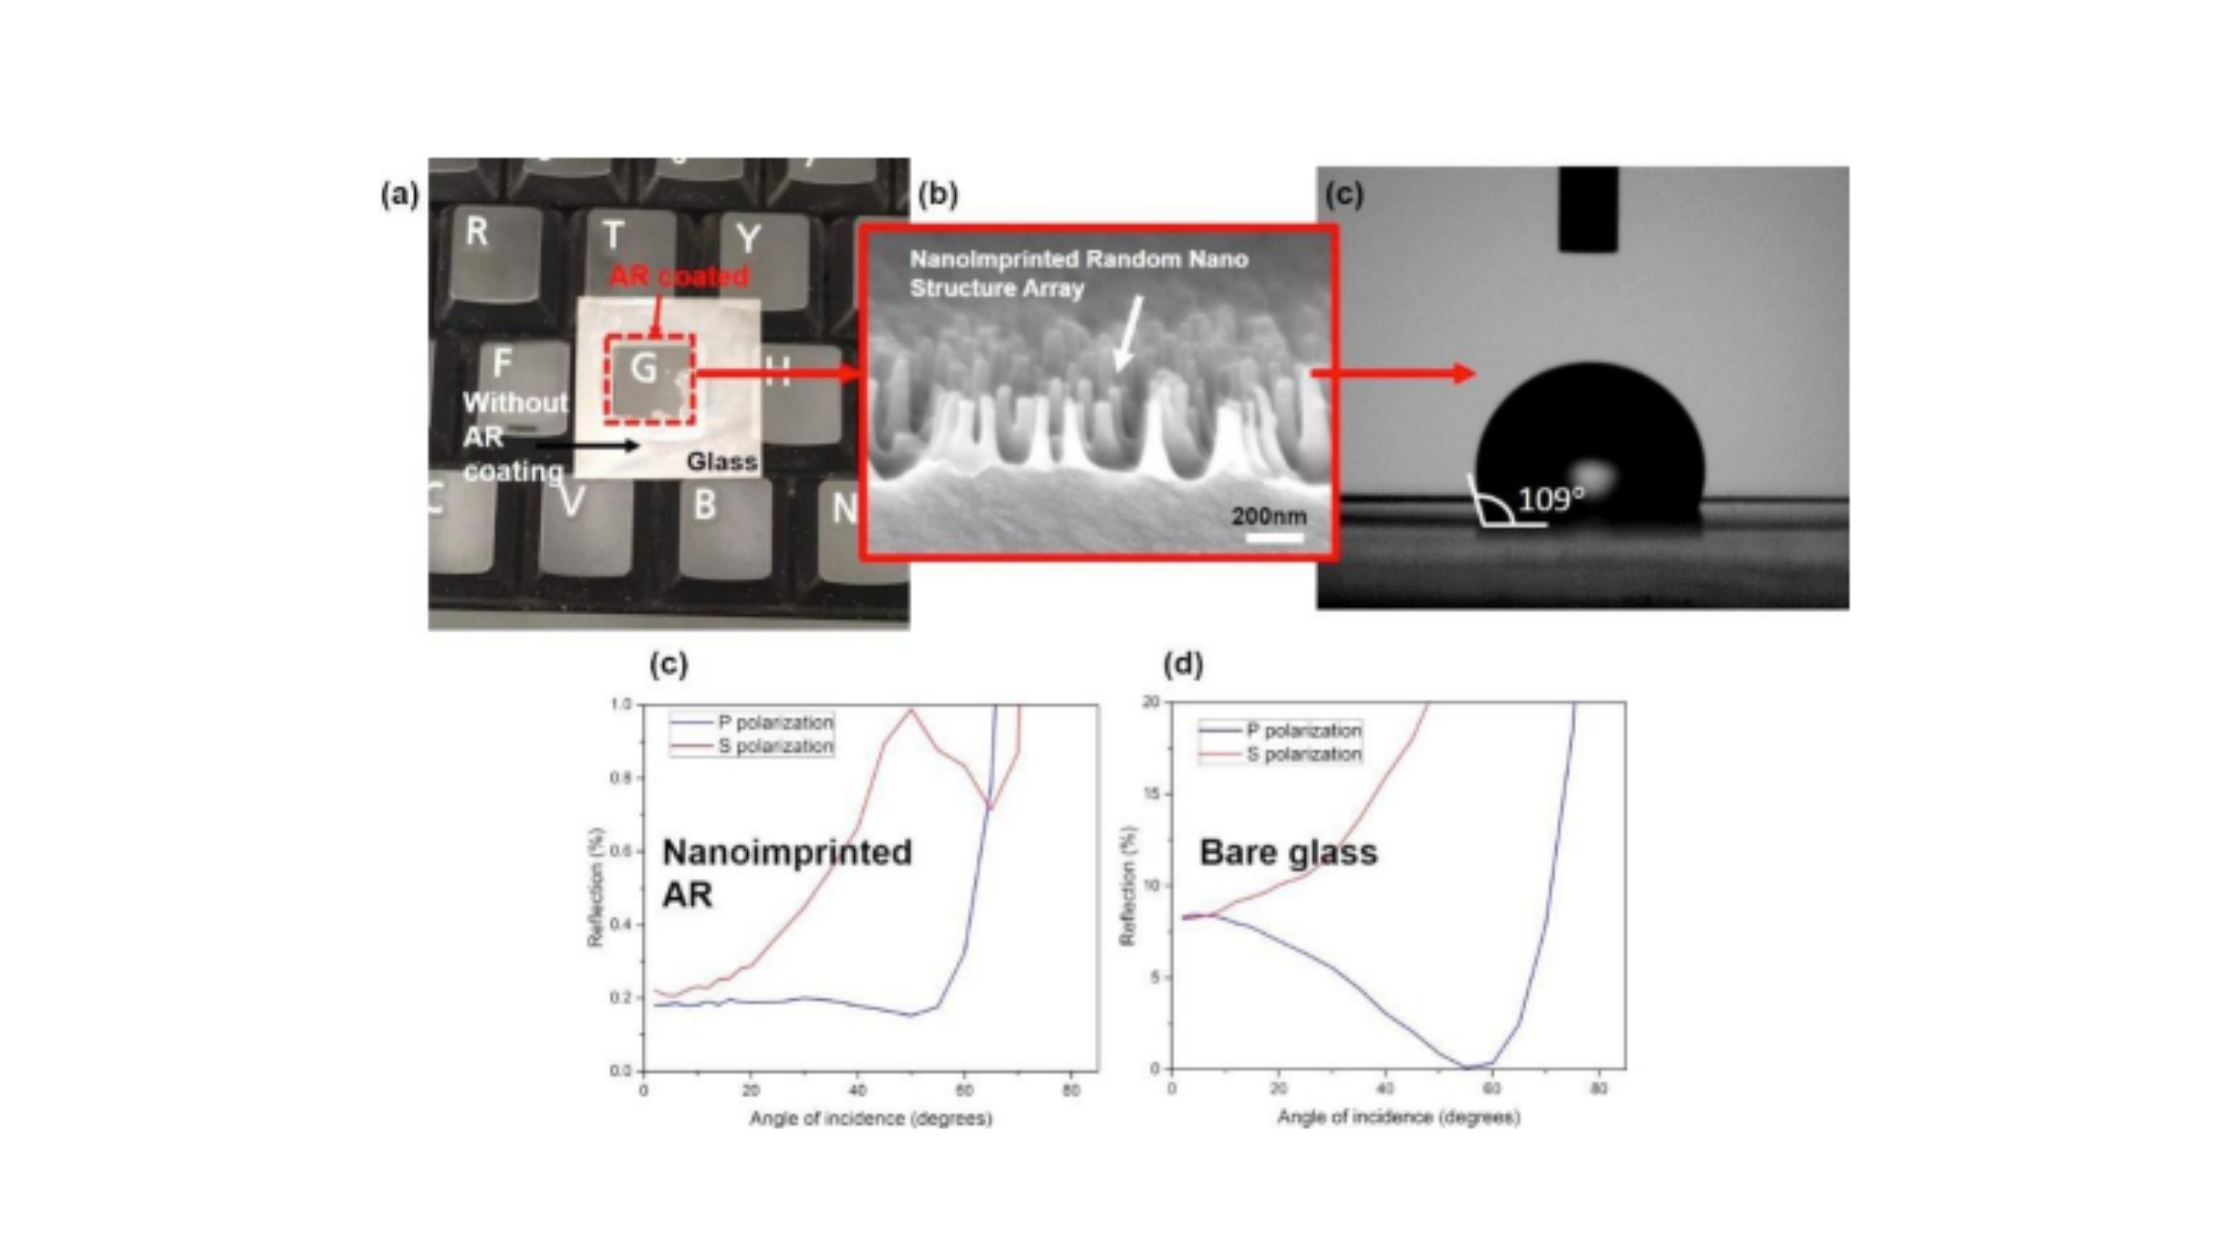 Ultra-High Refractive Index Polymers in the Visible Wavelength for Nanoimprint Lithography